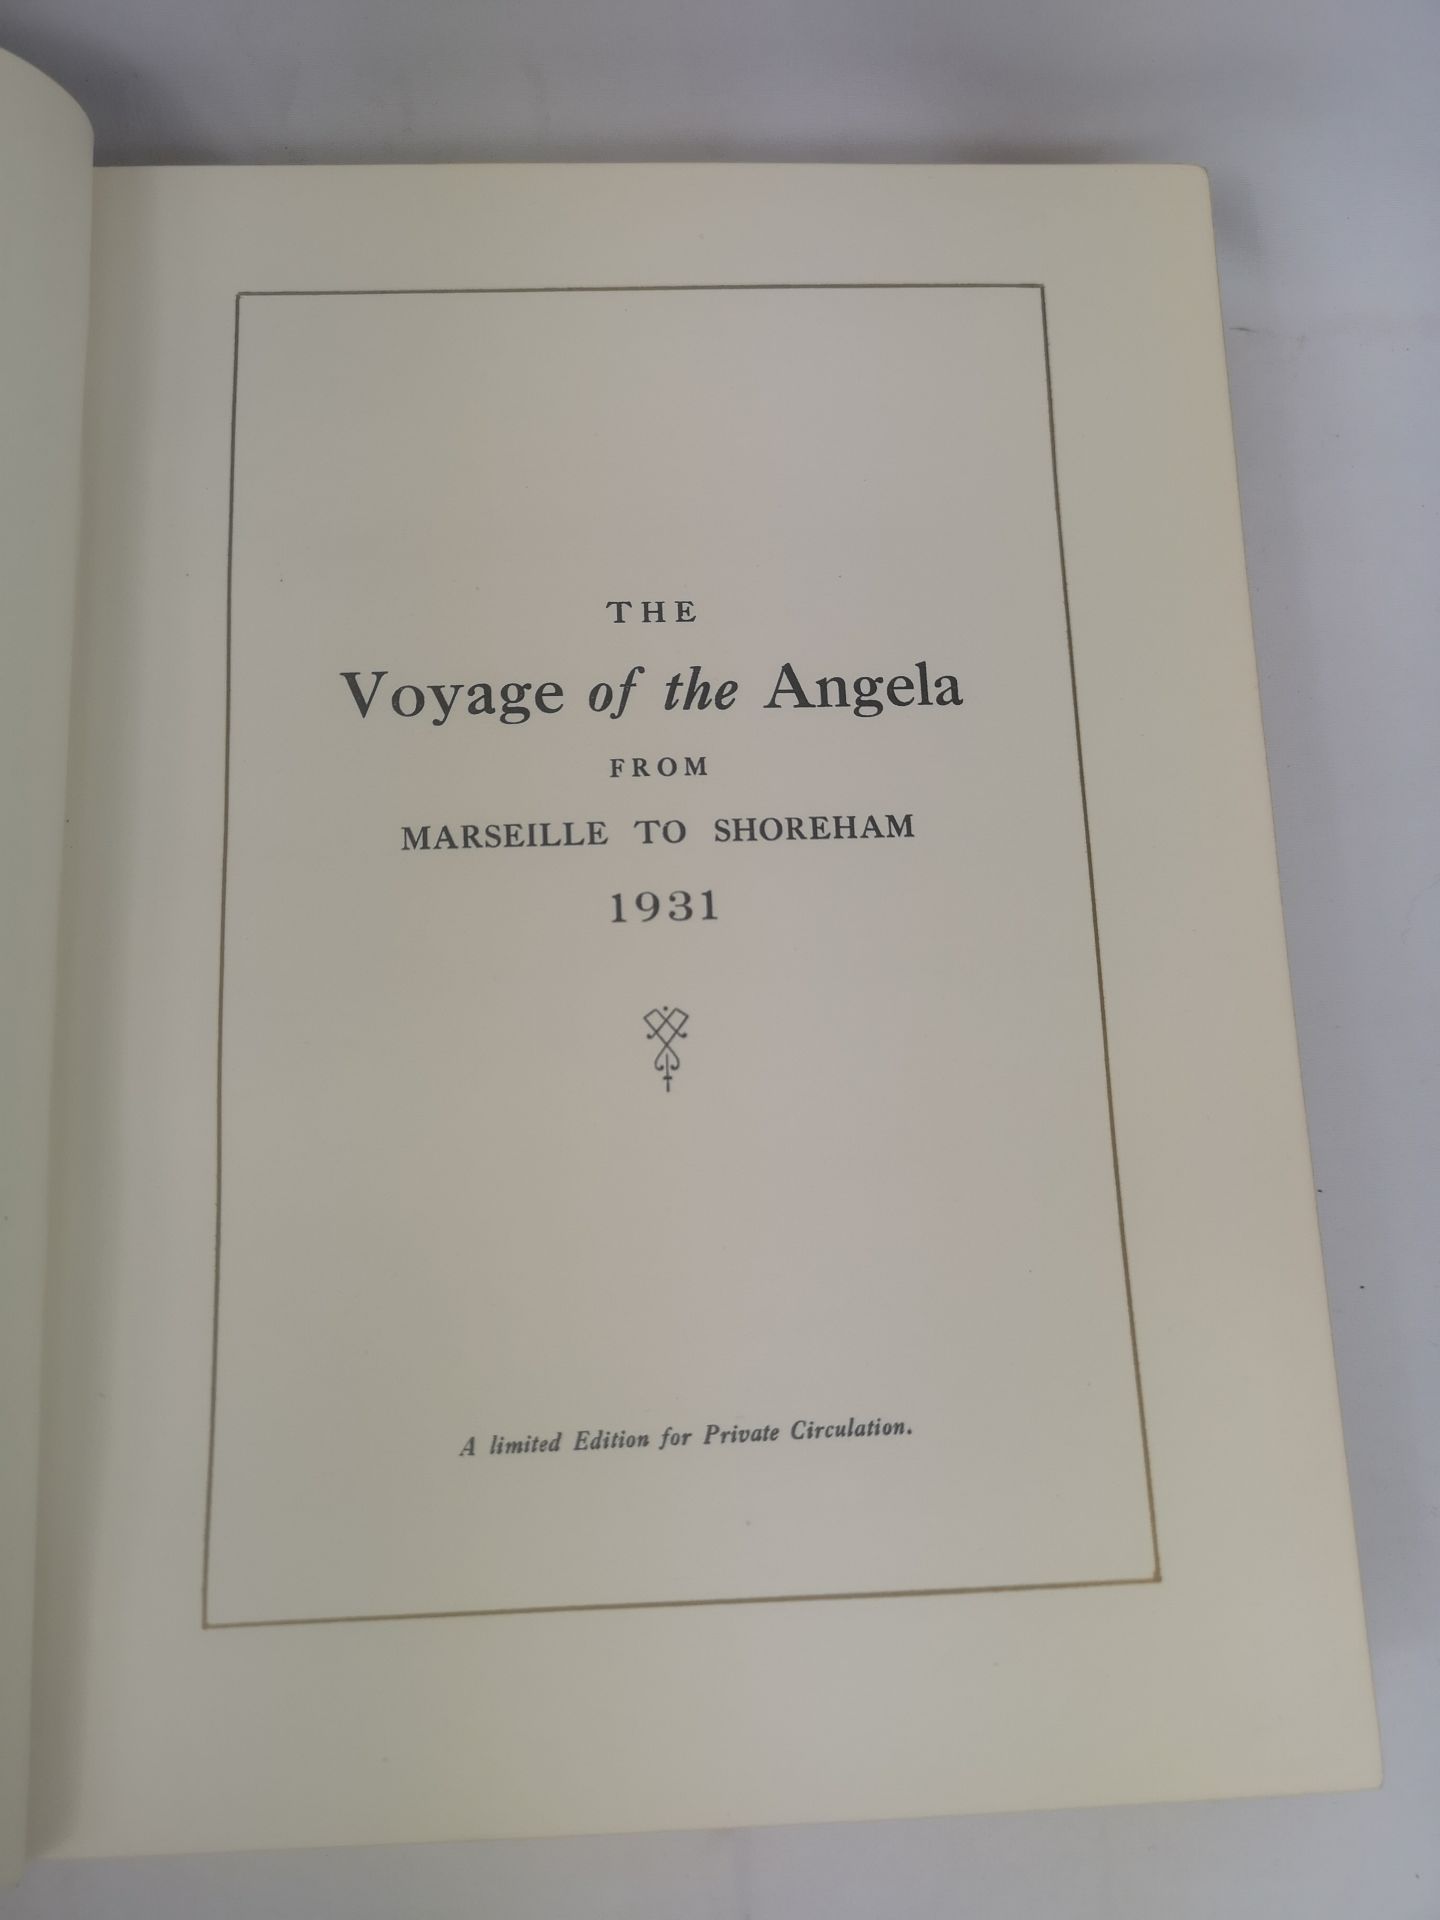 The Voyage of the Angela from Marseille to Shoreham 1931 - Image 7 of 7